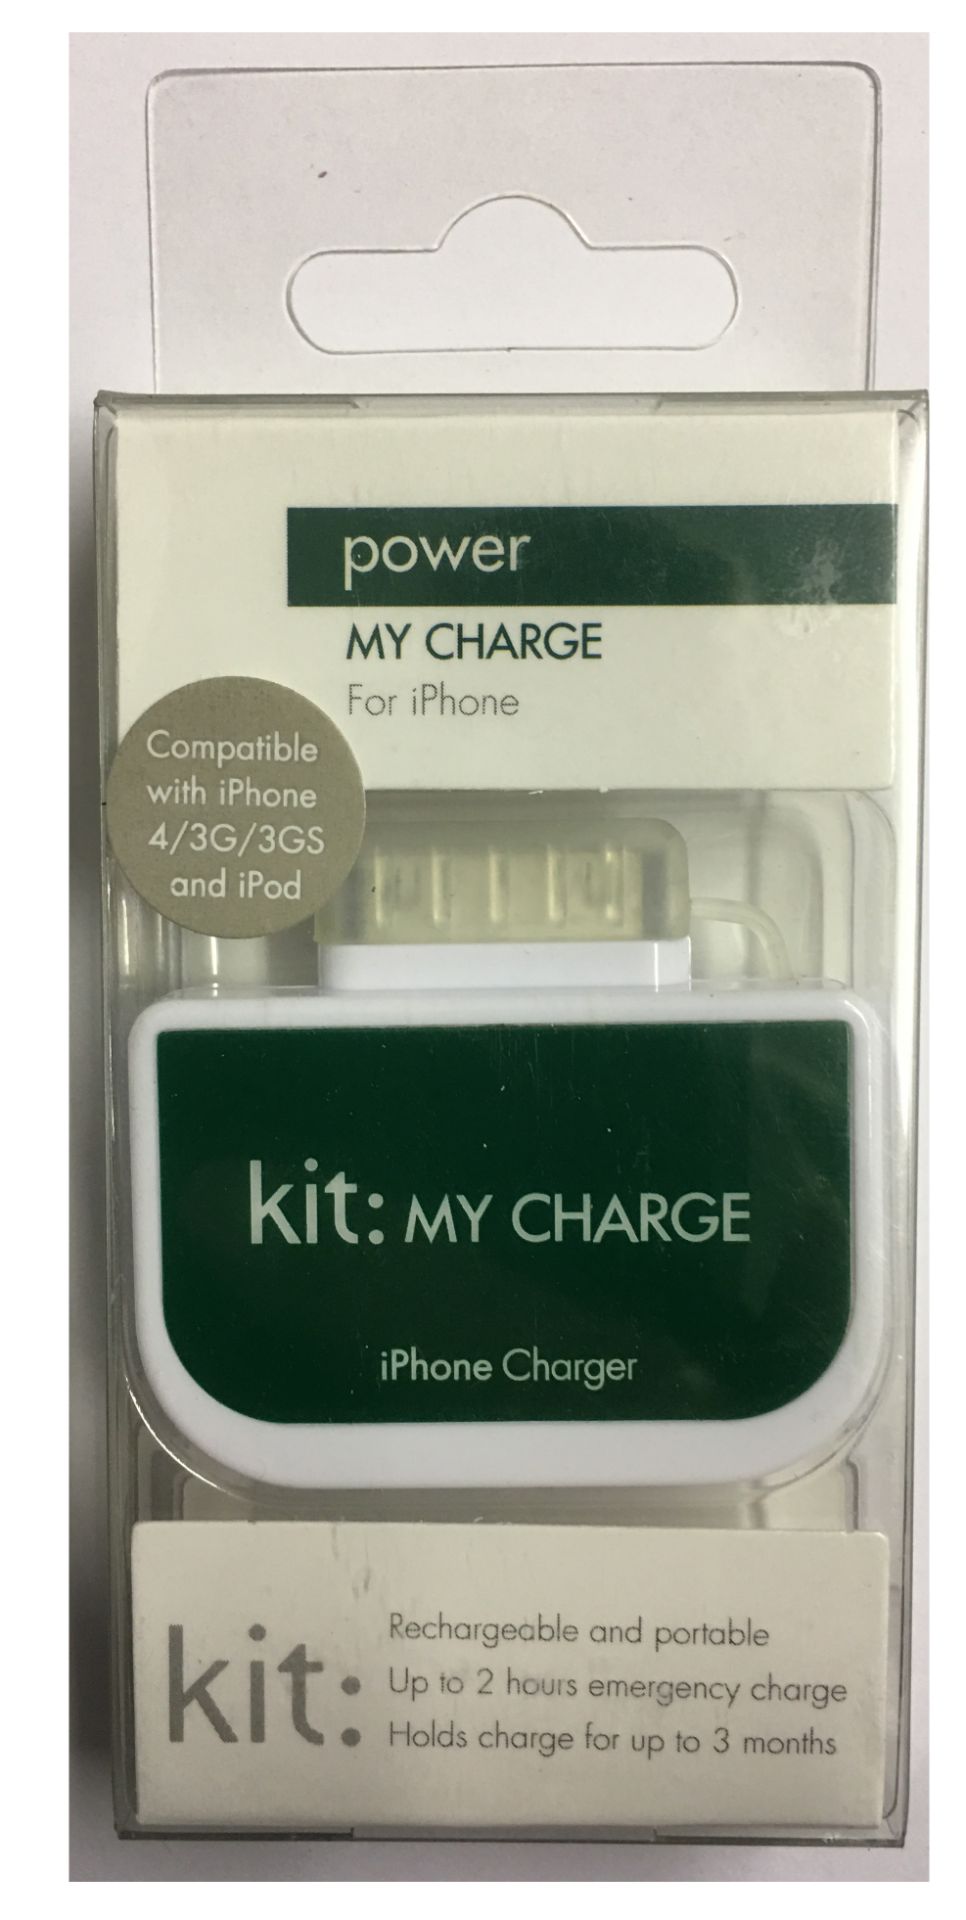 Lot of 30 Units-Kit iPhone Emergency Battery Charger MYCRGIP - Image 2 of 4